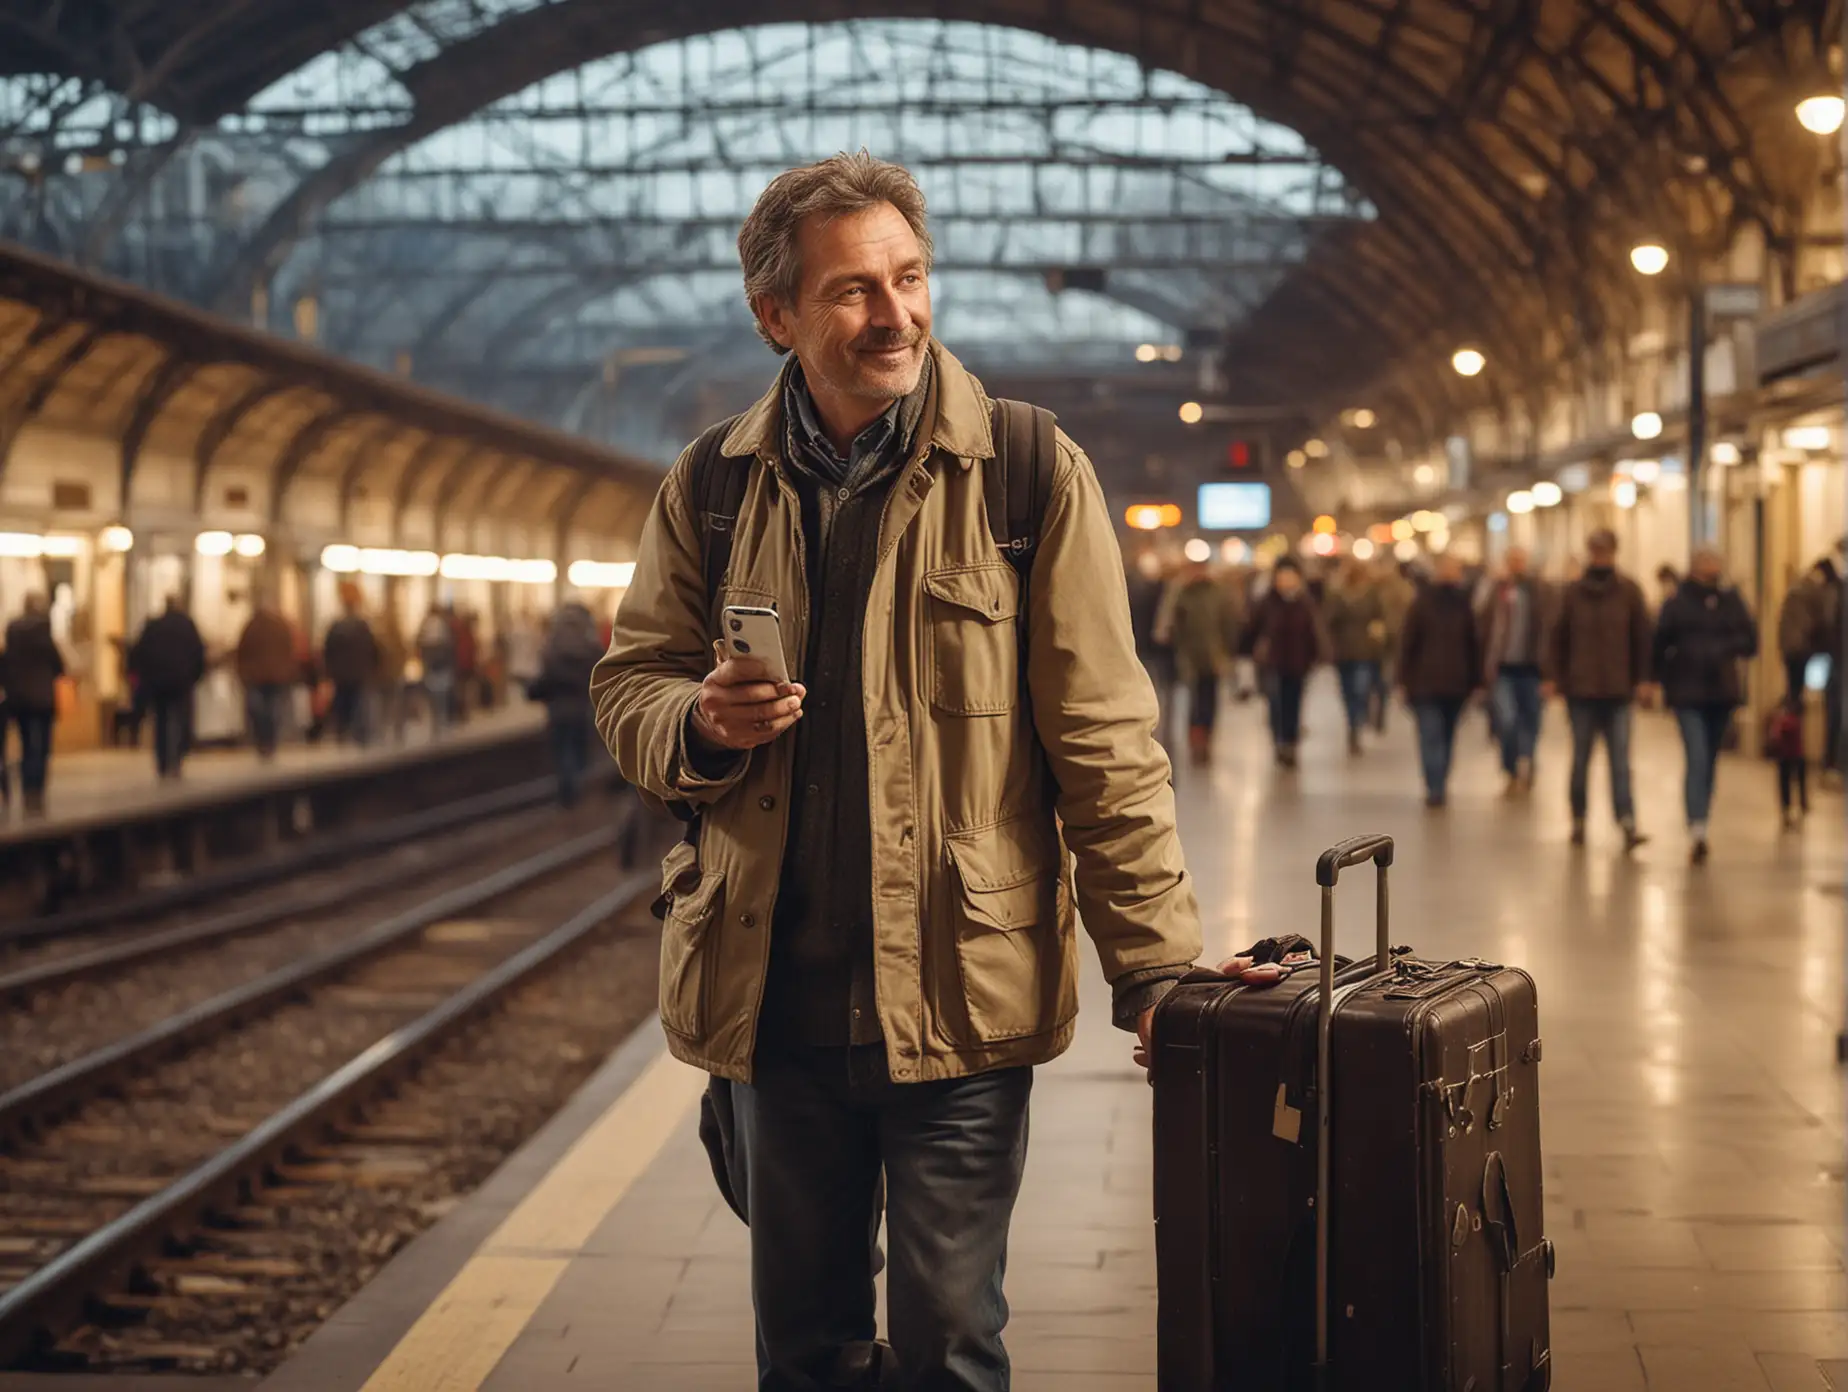 Mature Traveler with Map and Suitcase in Busy Railway Station